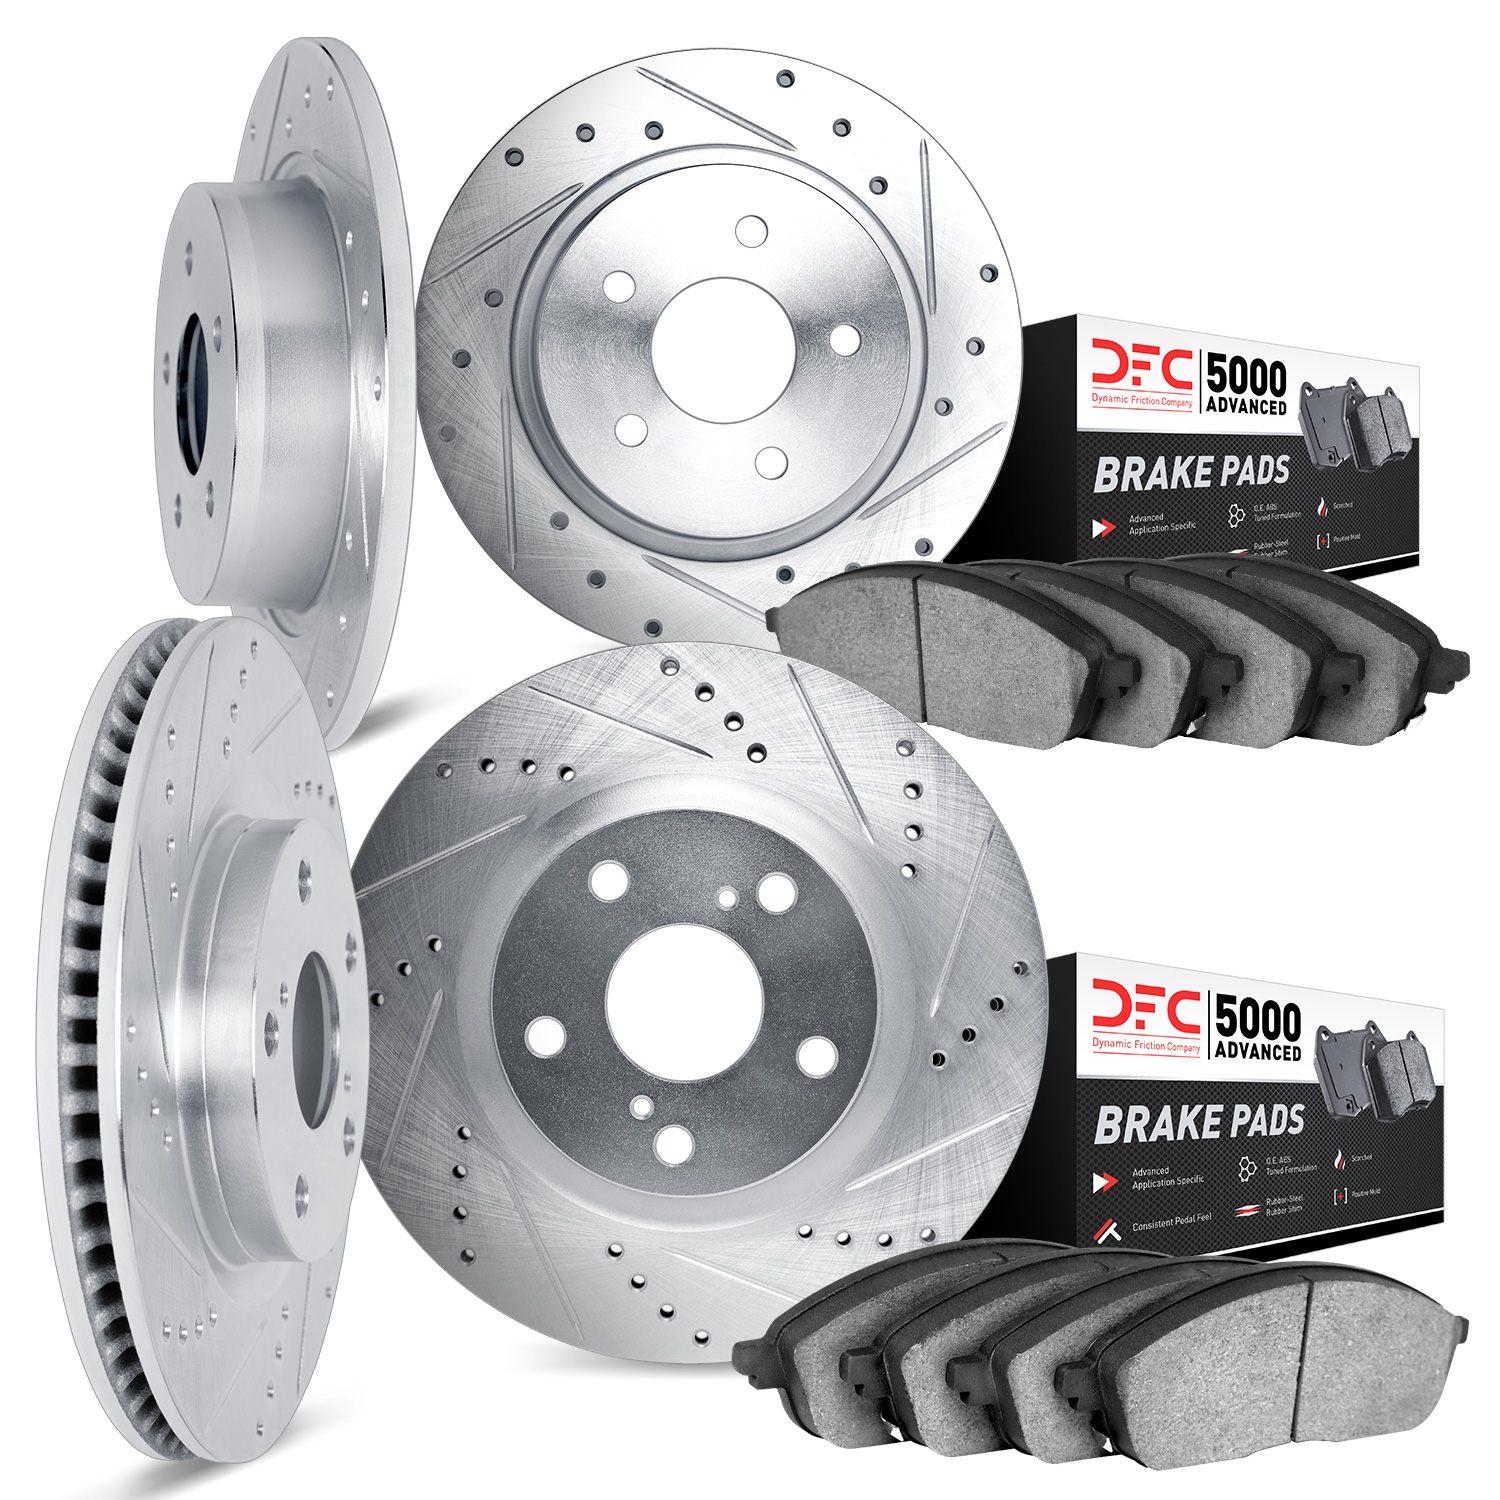 7504-76148 Drilled/Slotted Brake Rotors w/5000 Advanced Brake Pads Kit [Silver], 2005-2010 Lexus/Toyota/Scion, Position: Front a